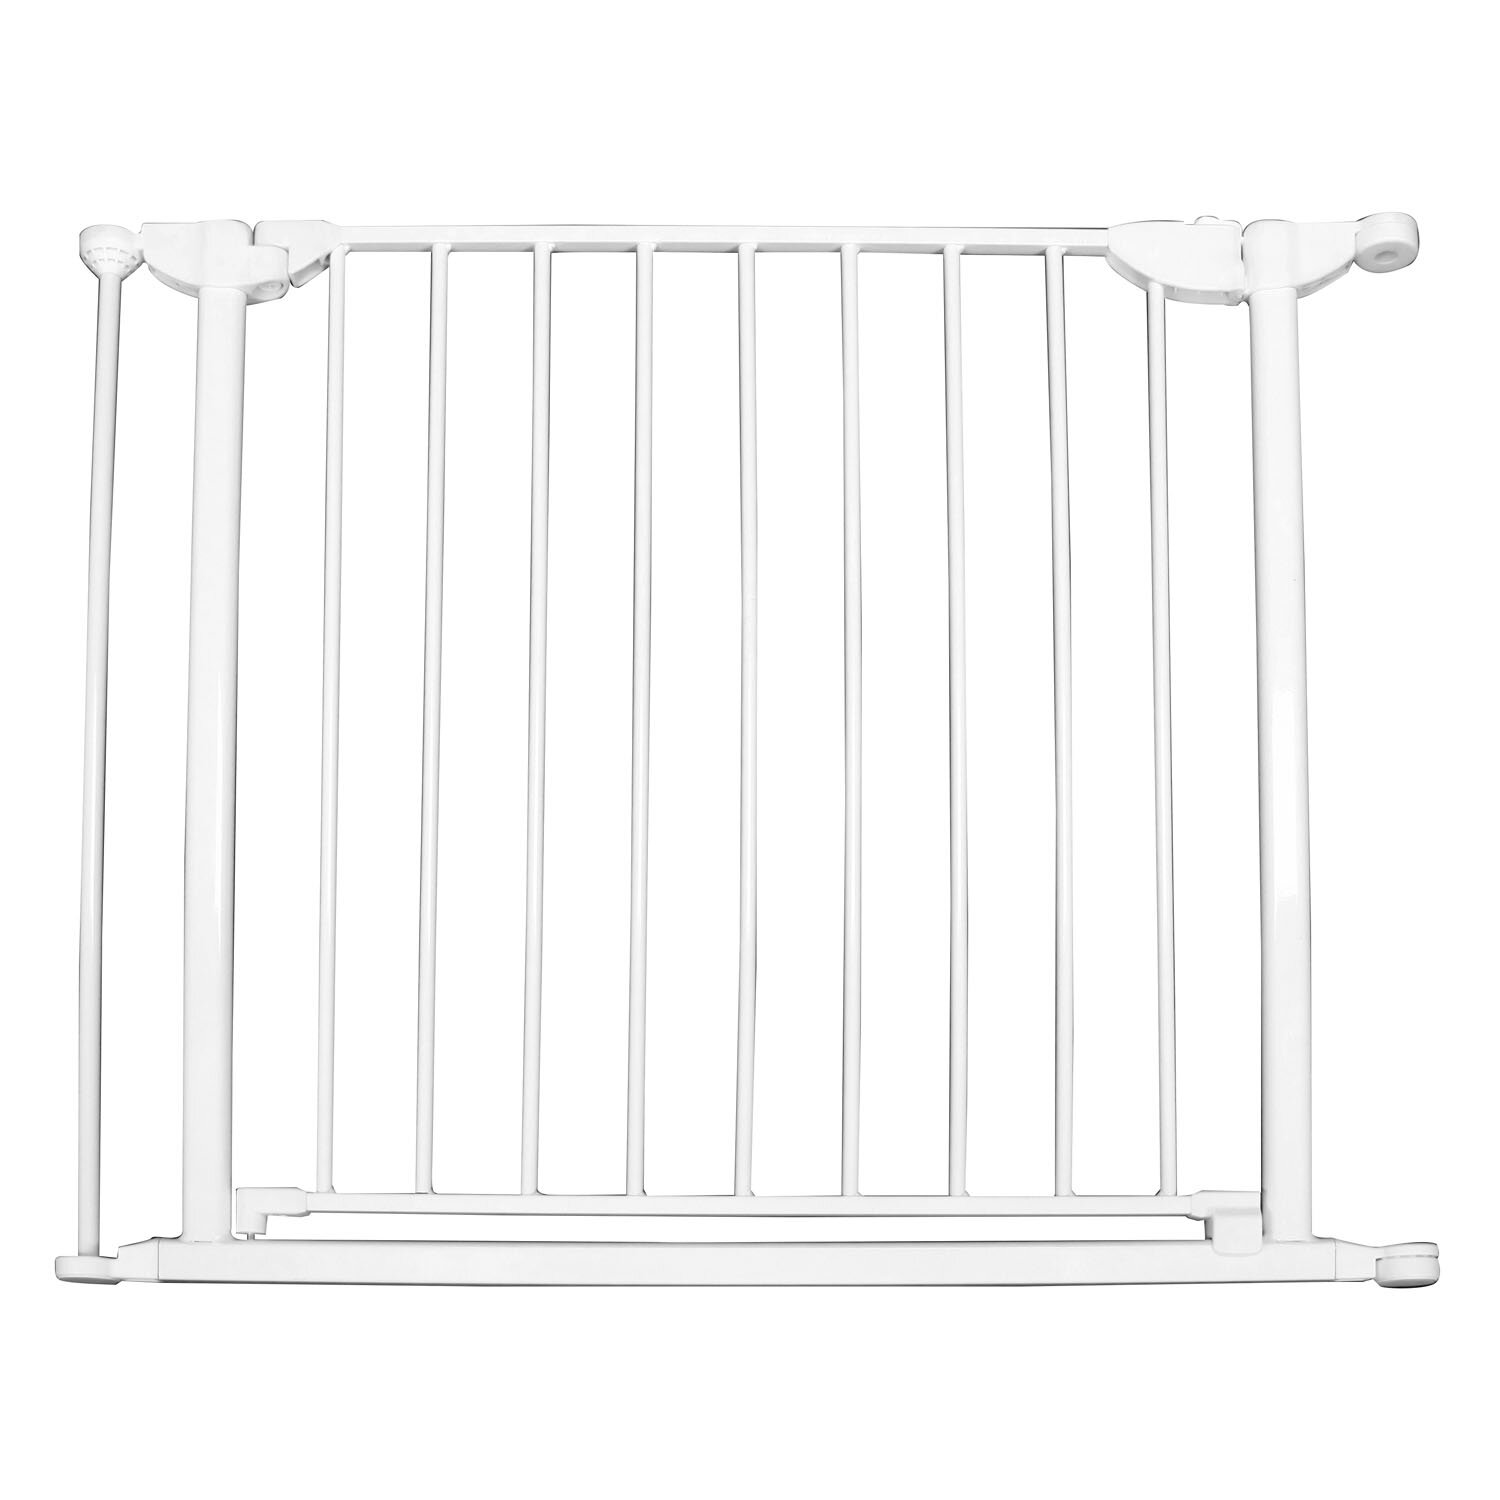 StayPut® Corner Protectors, 8 Pack — Qdos Baby Gates Child Safety and Baby  Proofing Products